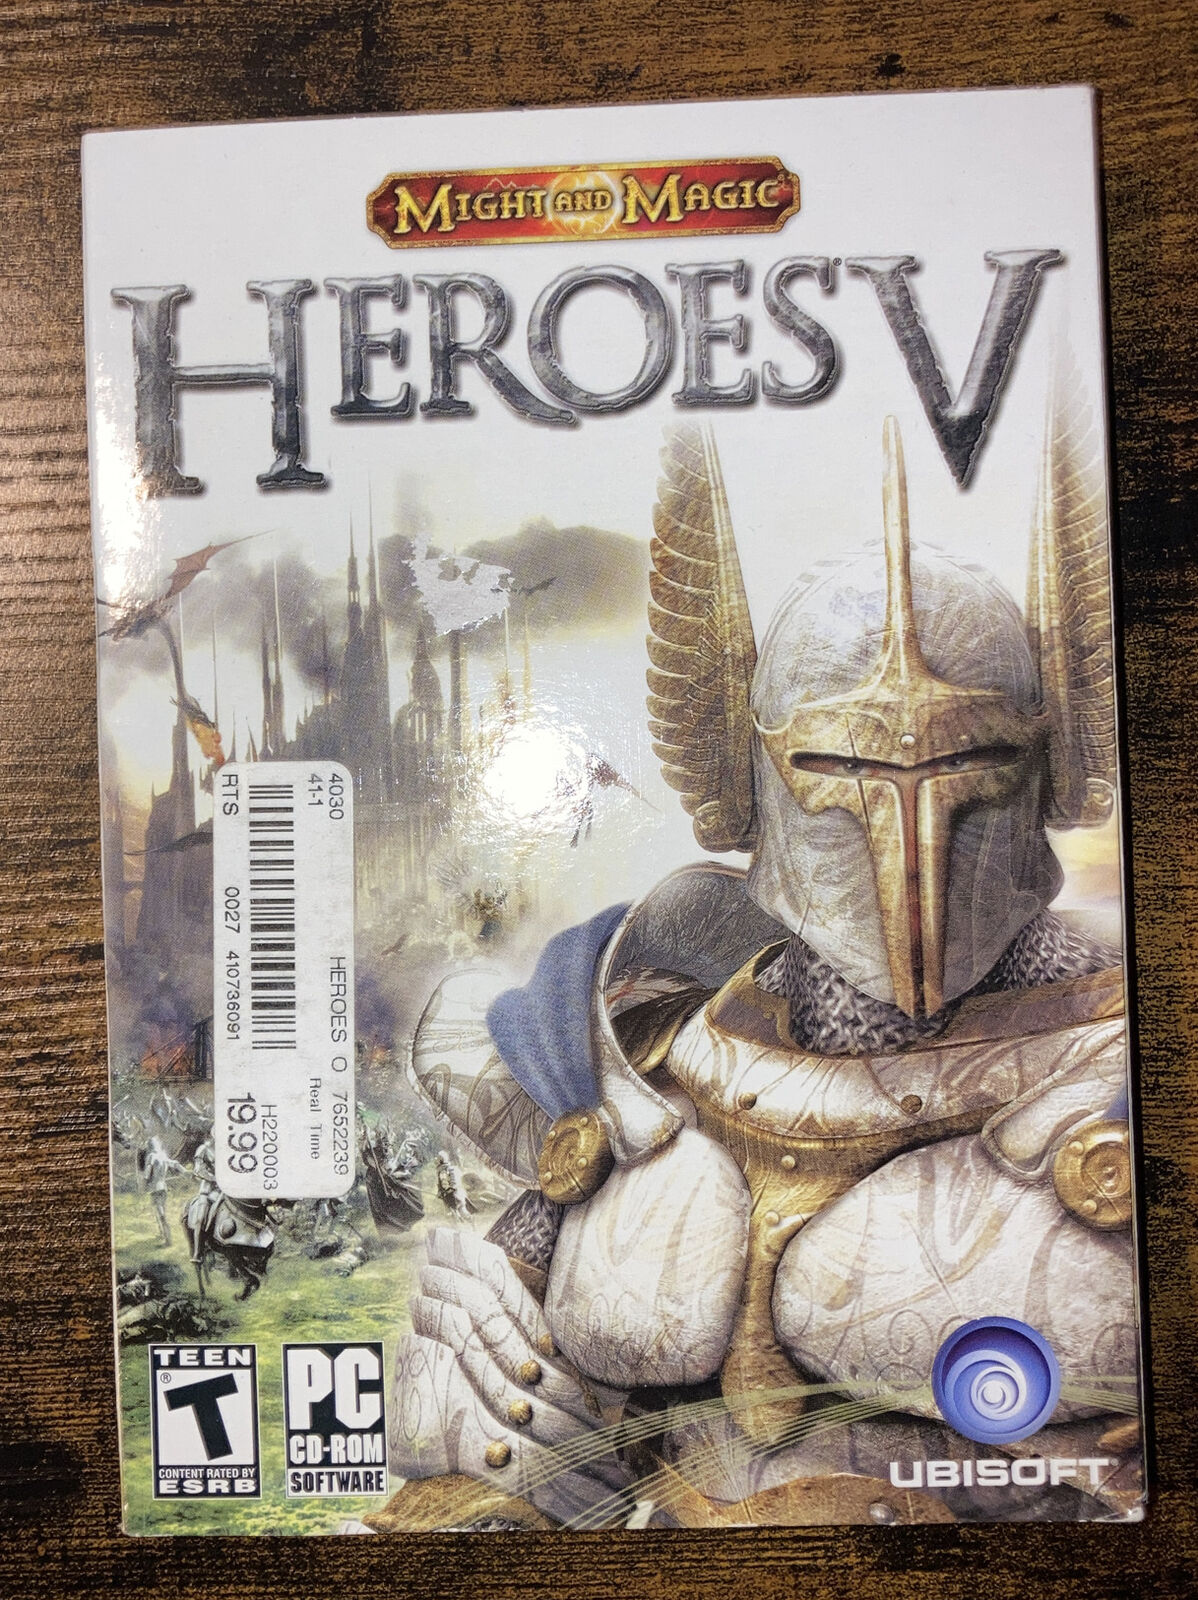 Heroes of Might and Magic V (PC, 2006) Complete With Key - 4 Discs